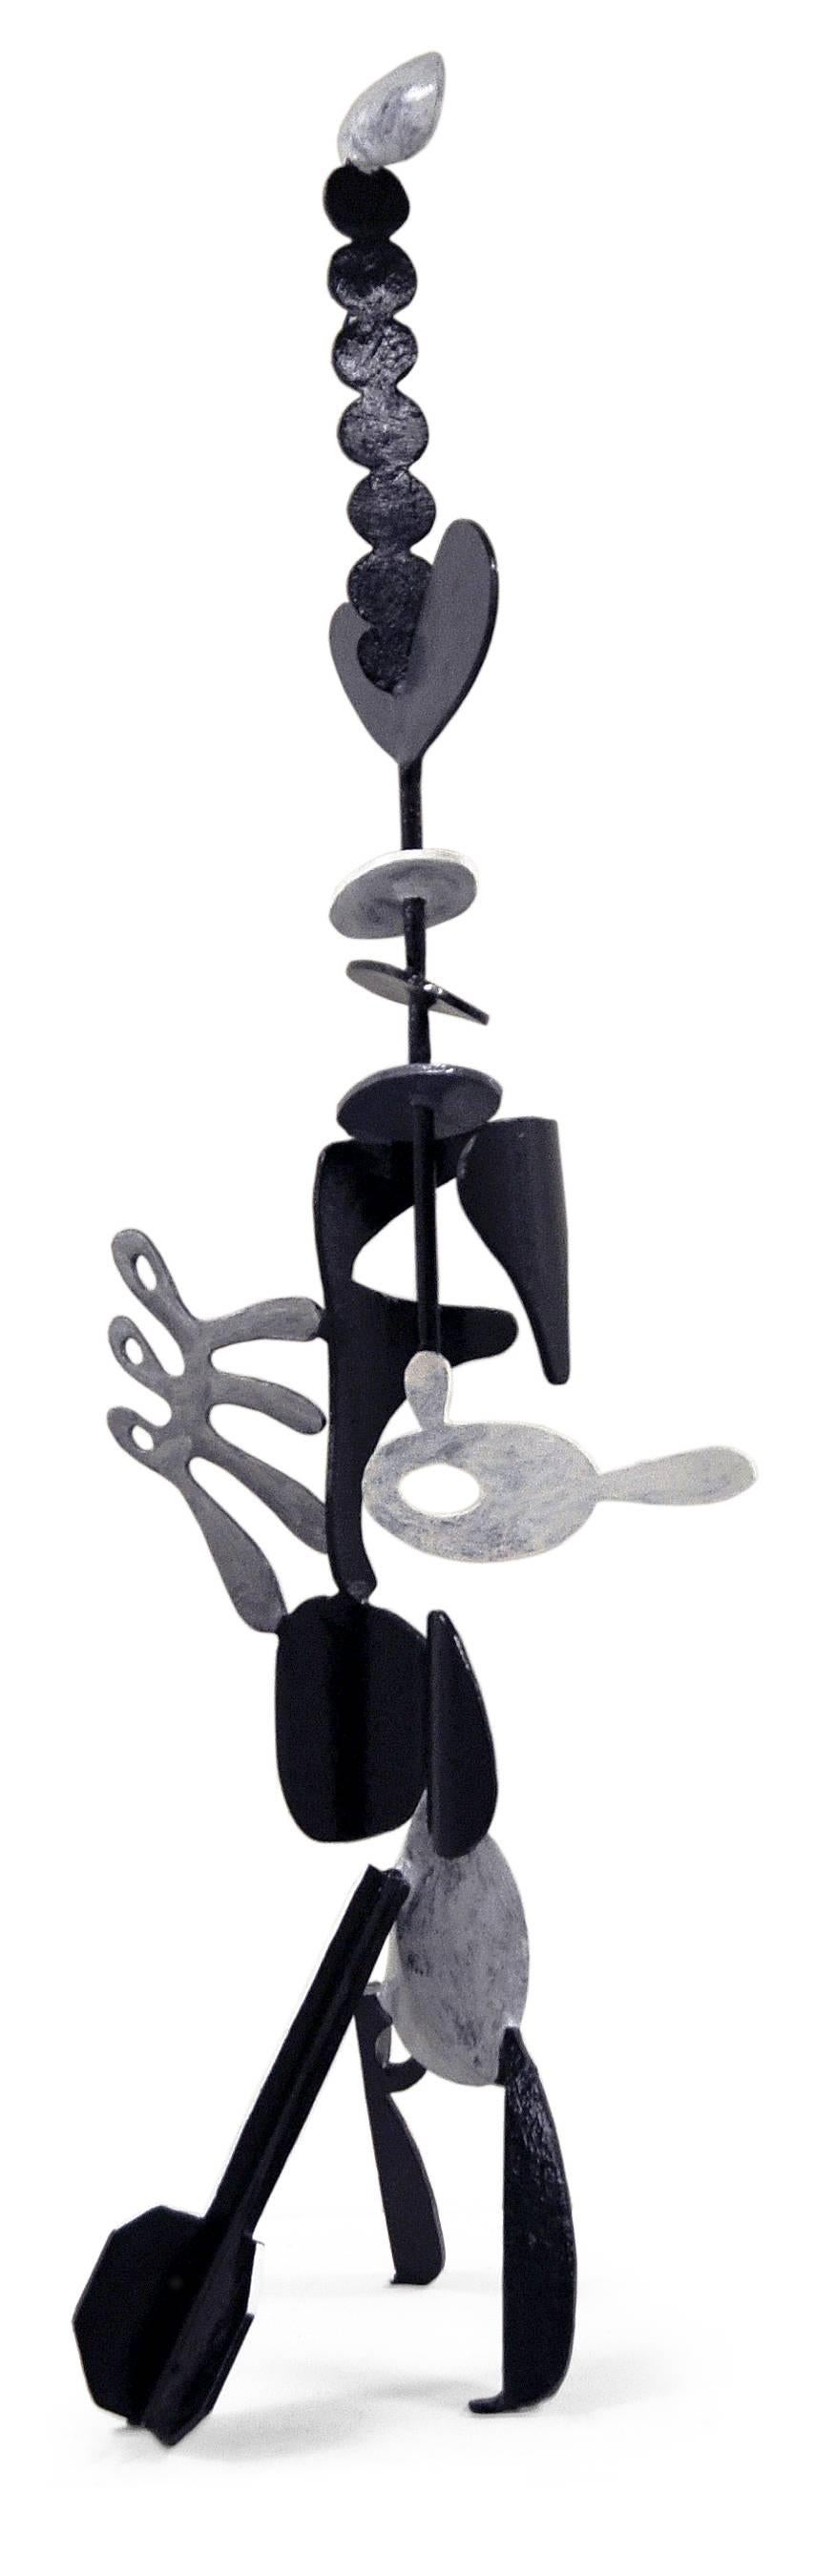 Peter Reginato Abstract Sculpture - Black and White Vertical